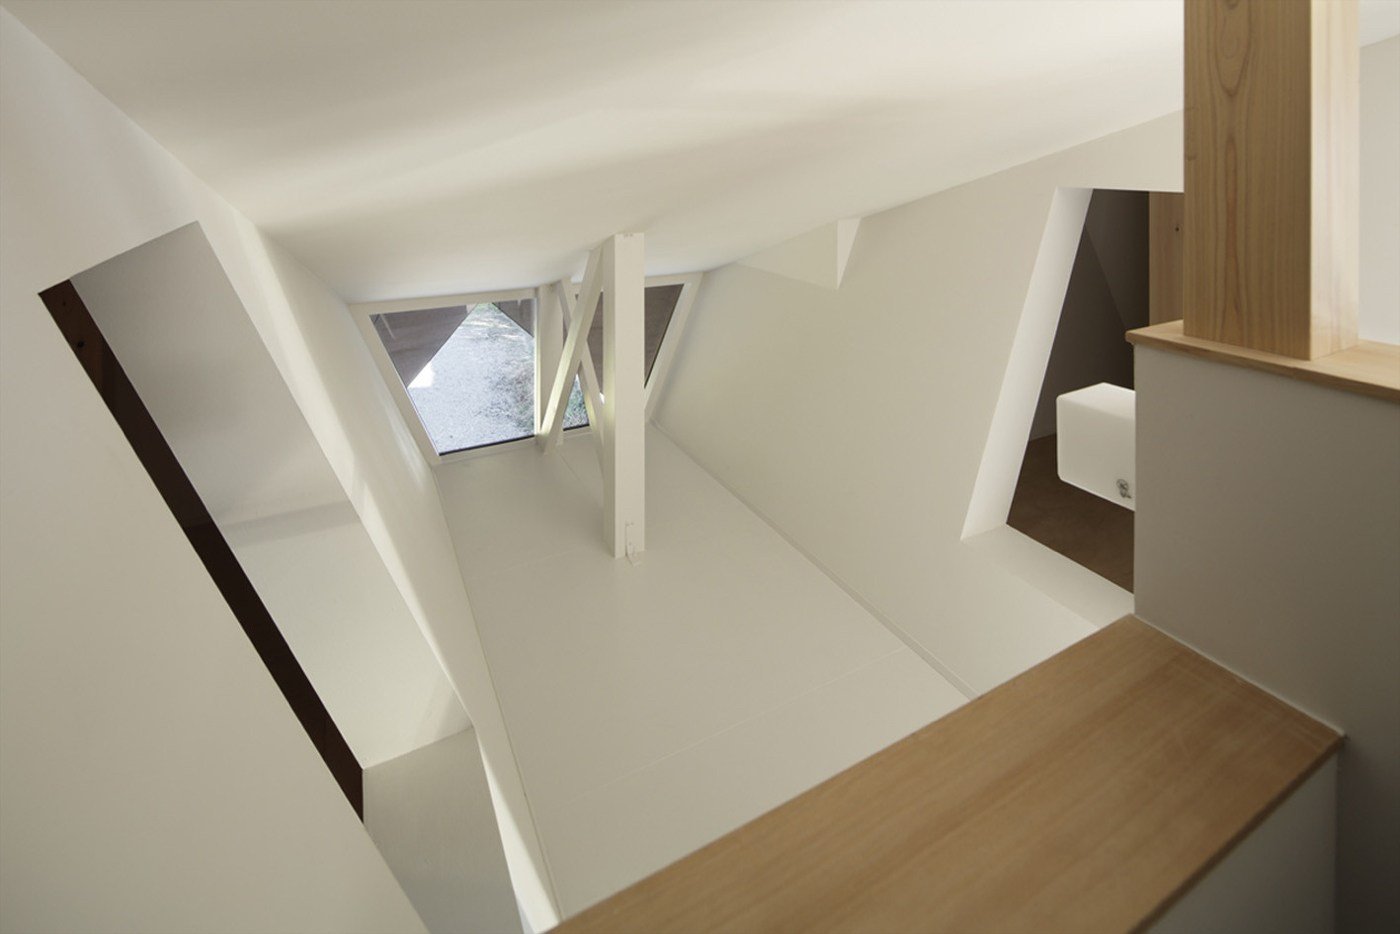 Sleeping areas under the roof rails provide functional ideas 